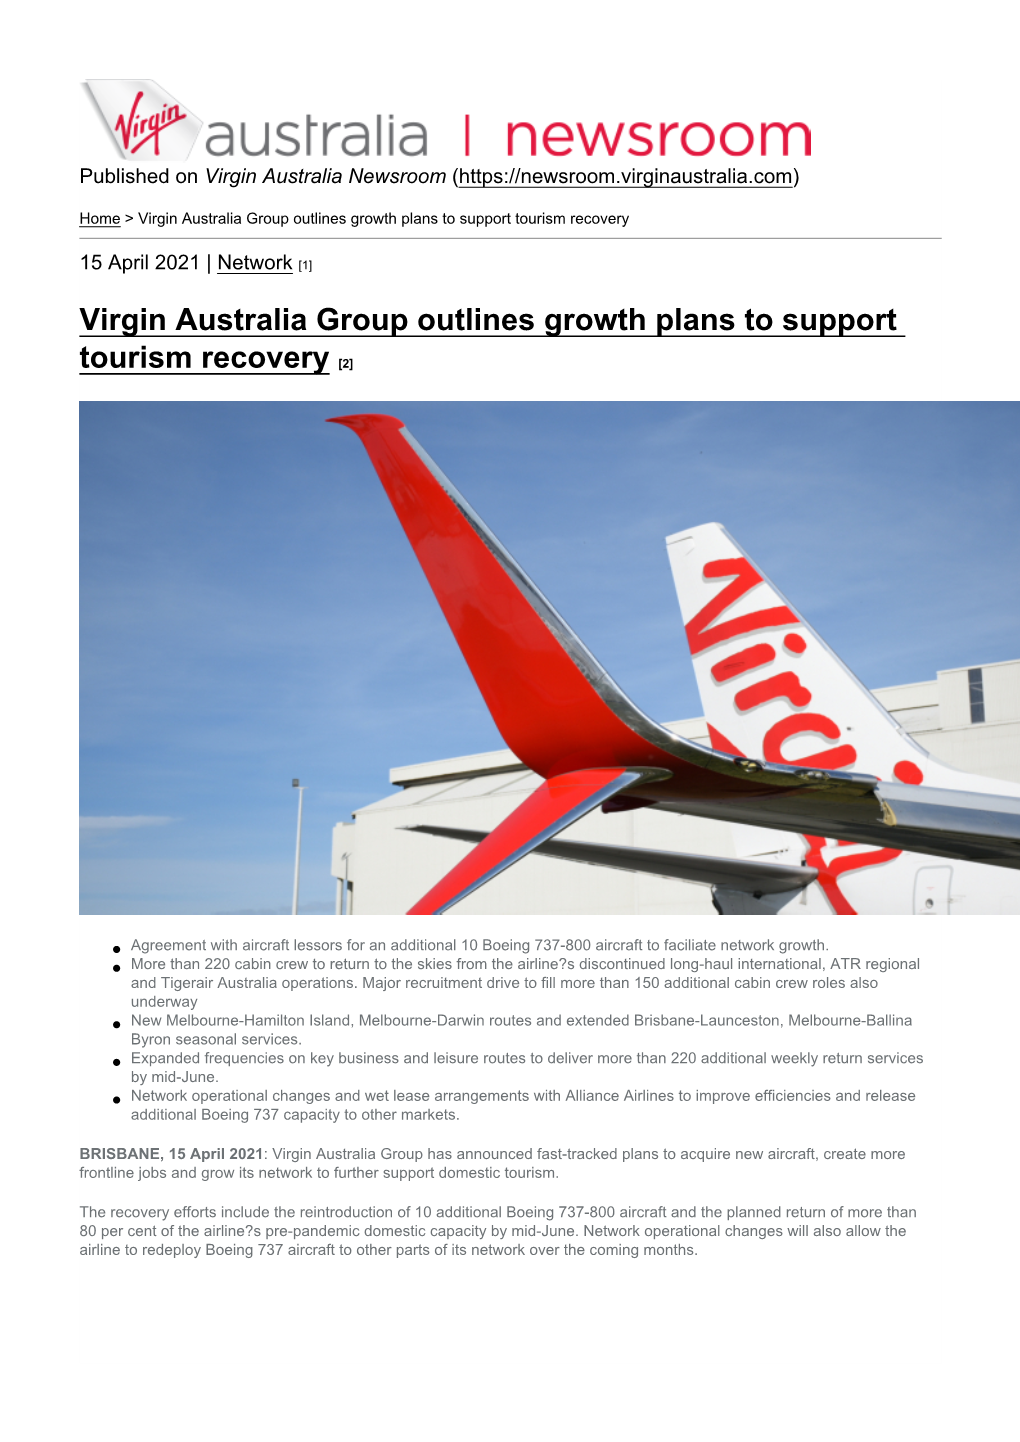 Virgin Australia Group Outlines Growth Plans to Support Tourism Recovery